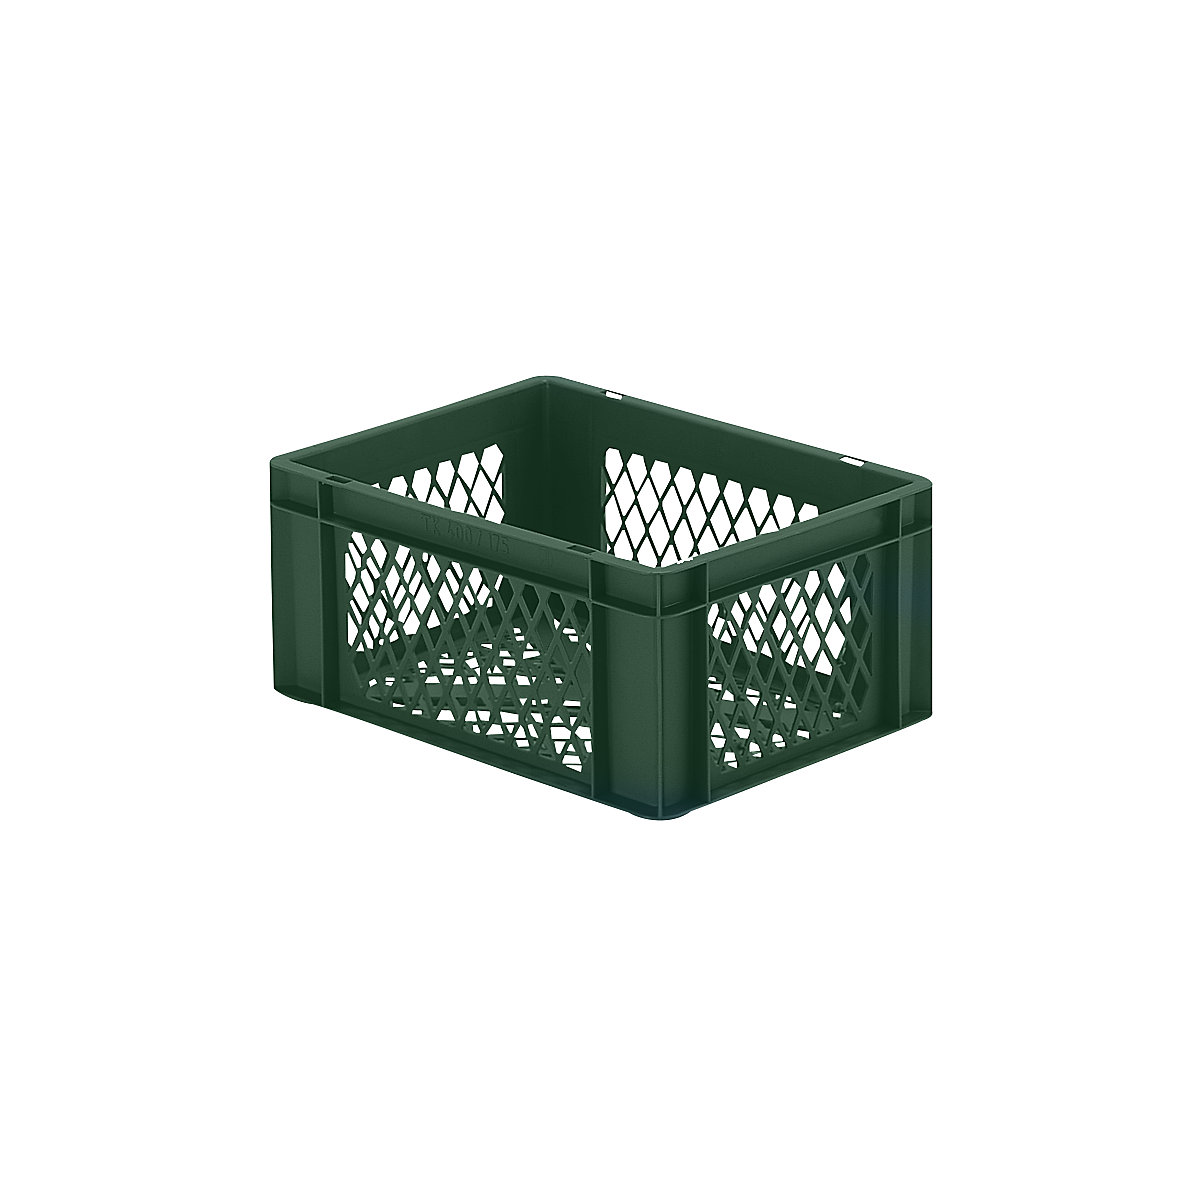 Euro stacking container, perforated walls and base, LxWxH 400 x 300 x 175 mm, green, pack of 5